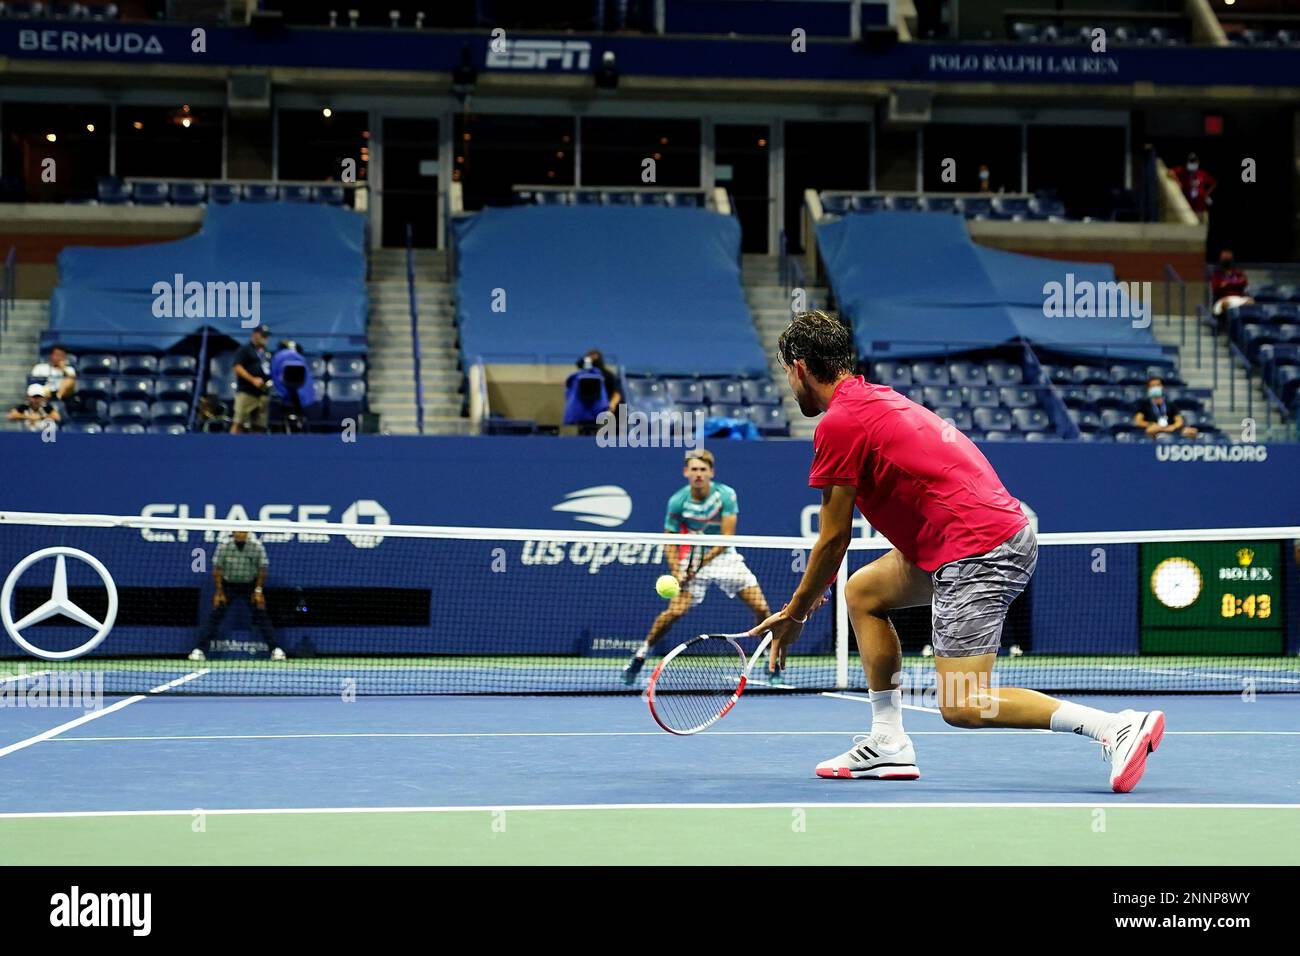 Dominic Thiem in action against Alex de Minaur during a mens singles match at the 2020 US Open, Wednesday, Sept